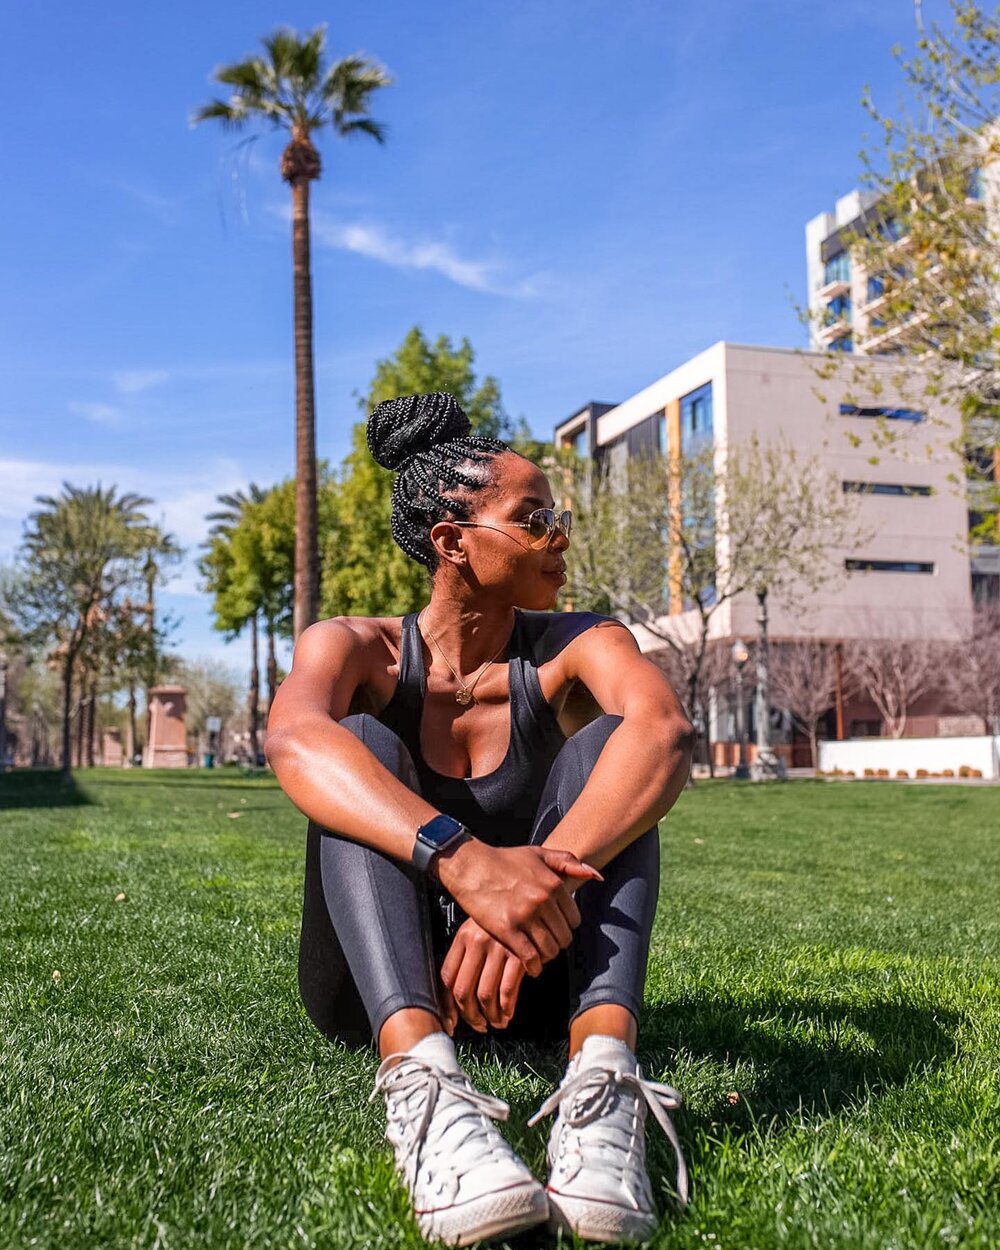 Soaking up the sun between meals in Phoenix! Sharing a list of Black Owned Restaurants below. 🤎

📍The Larder + The Delta (@thelarderphx)
📍Lolo&rsquo;s Chicken &amp; Waffles (@loloschickenandwaffles)
📍Monroe&rsquo;s Hot Chicken (@monroeshotchicken)
📍Trapp Haus (@trapphausbbq)
📍Honey Bear&rsquo;s BBQ (@honeybearsbbq)
📍Rag&rsquo;s Real Chicken &amp; Waffles
📍Jupiter Rings, Vegan (@jupiterringsky)
📍Breakfast Bitch (@breakfastbitch_az)
📍Hint of Soul
📍Stacy&rsquo;s Off the Hook BBQ &amp; Soul Food 
📍Mrs. White&rsquo;s Golden Rule Cafe
📍The Breadfruit &amp; Rum Bar (@thebreadfruit)

I was lucky enough to try most of these and will more on the items I love soon. The Breadfruit &amp; Rum Bar is not open for dine in but keep an eye out for their jerk pop up&rsquo;s and @bigmarbleorganics, their latest venture! I got a chance to chat with Dwayne, the owner while I was here and cannot wait to share more on the blog.